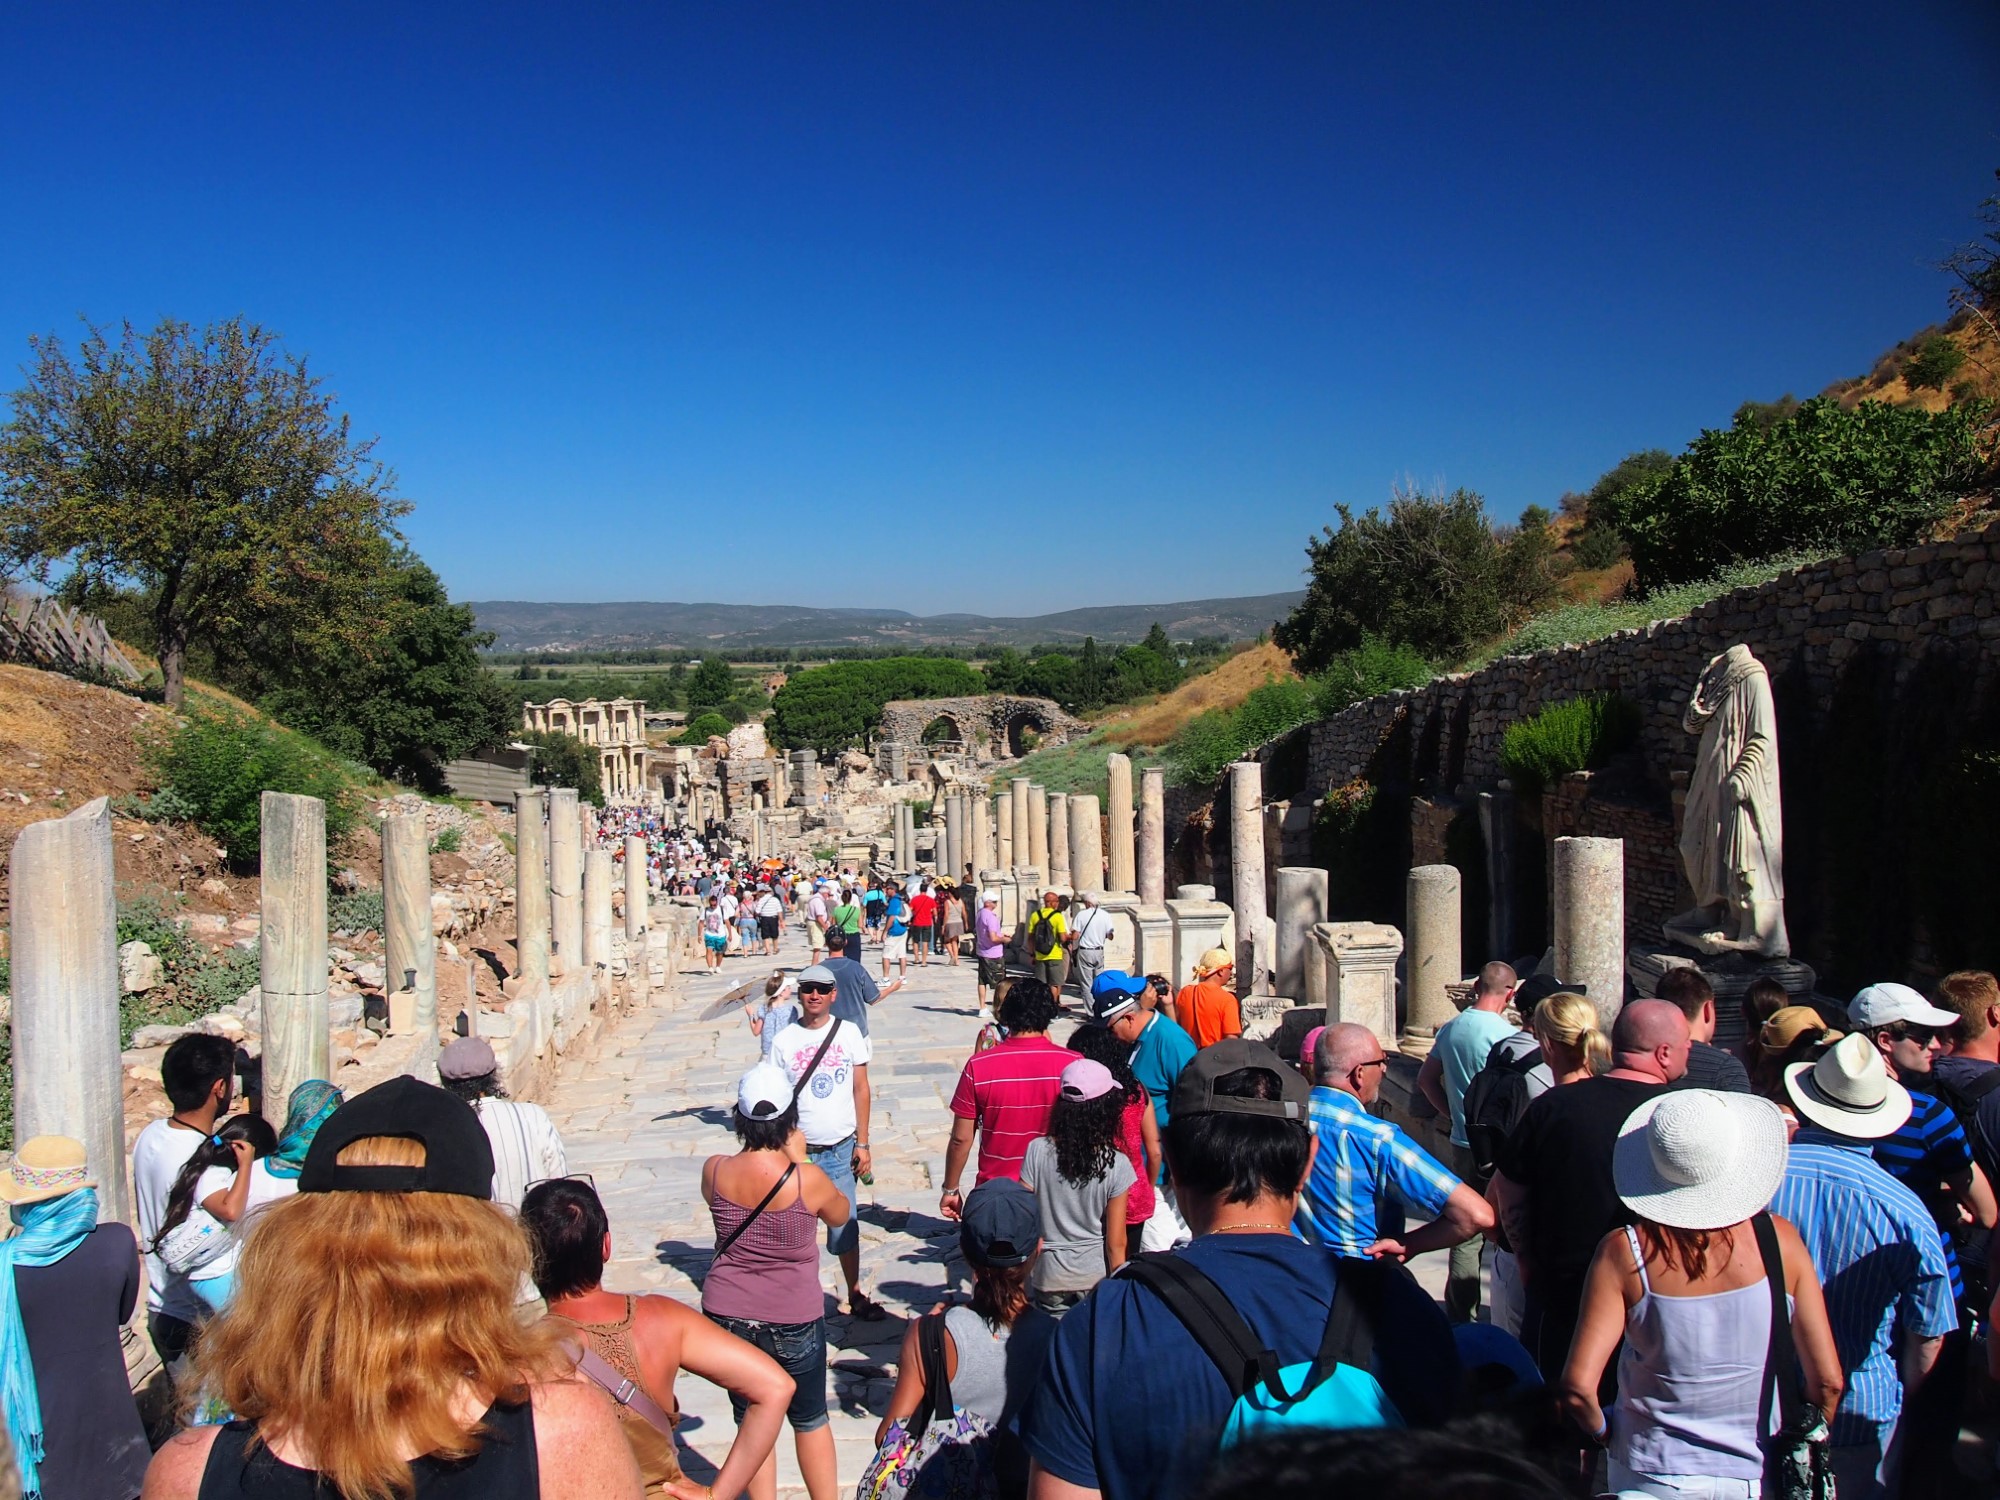 Crowds of people at Ephesus, at the top of a long descending path with the Library of Celsus visible at th ebottom